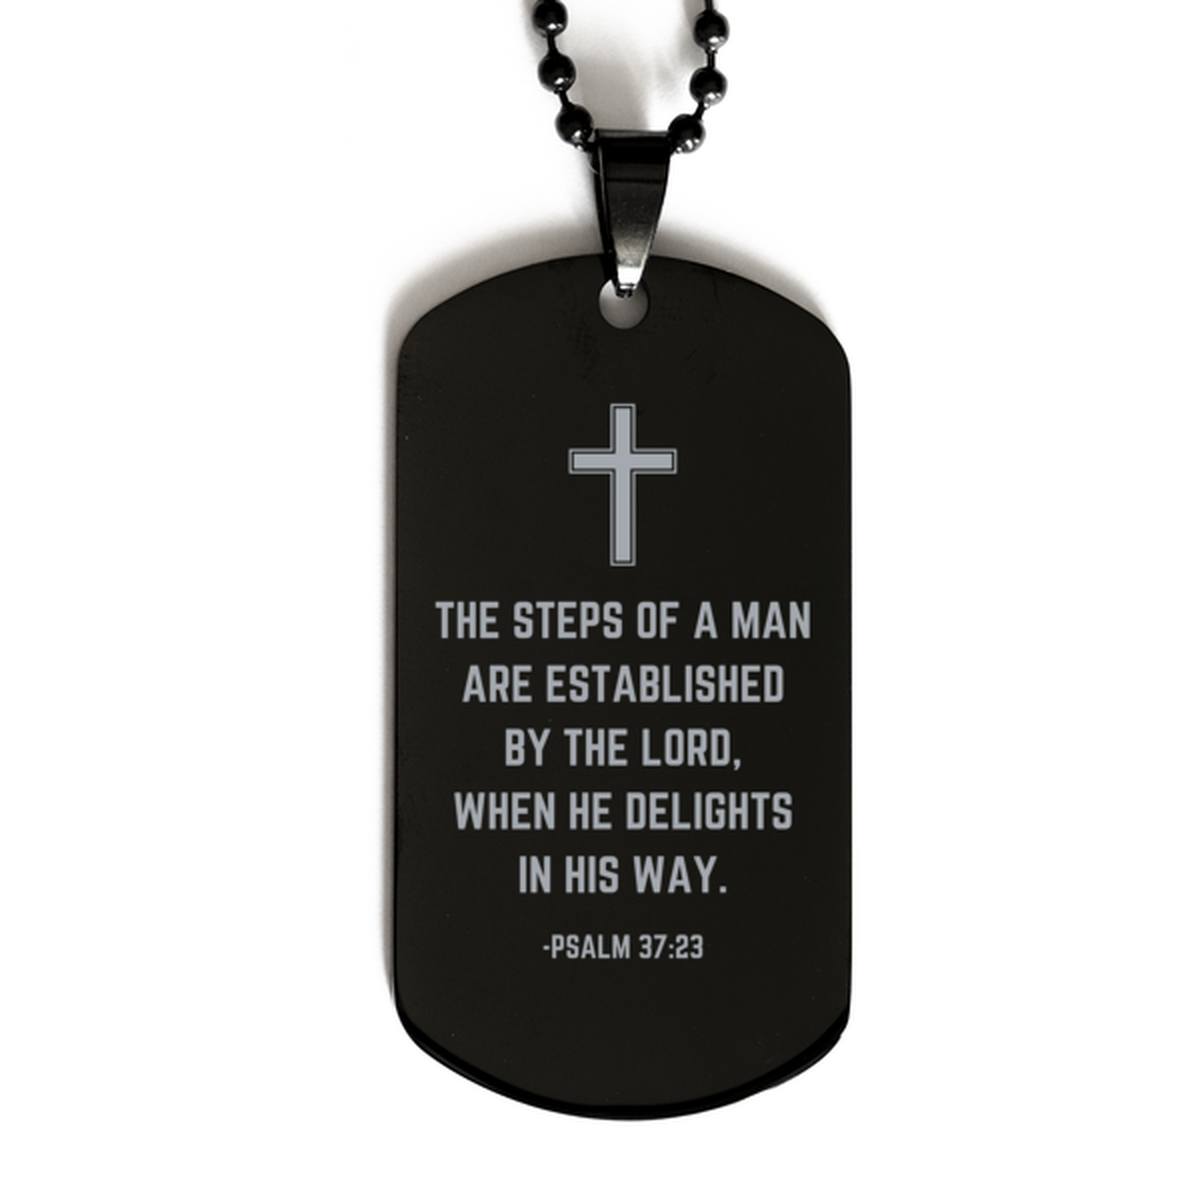 Baptism Gifts For Teenage Boys Girls, Christian Bible Verse Black Dog Tag, The steps of a man are, Confirmation Gifts, Bible Verse Necklace for Son, Godson, Grandson, Nephew